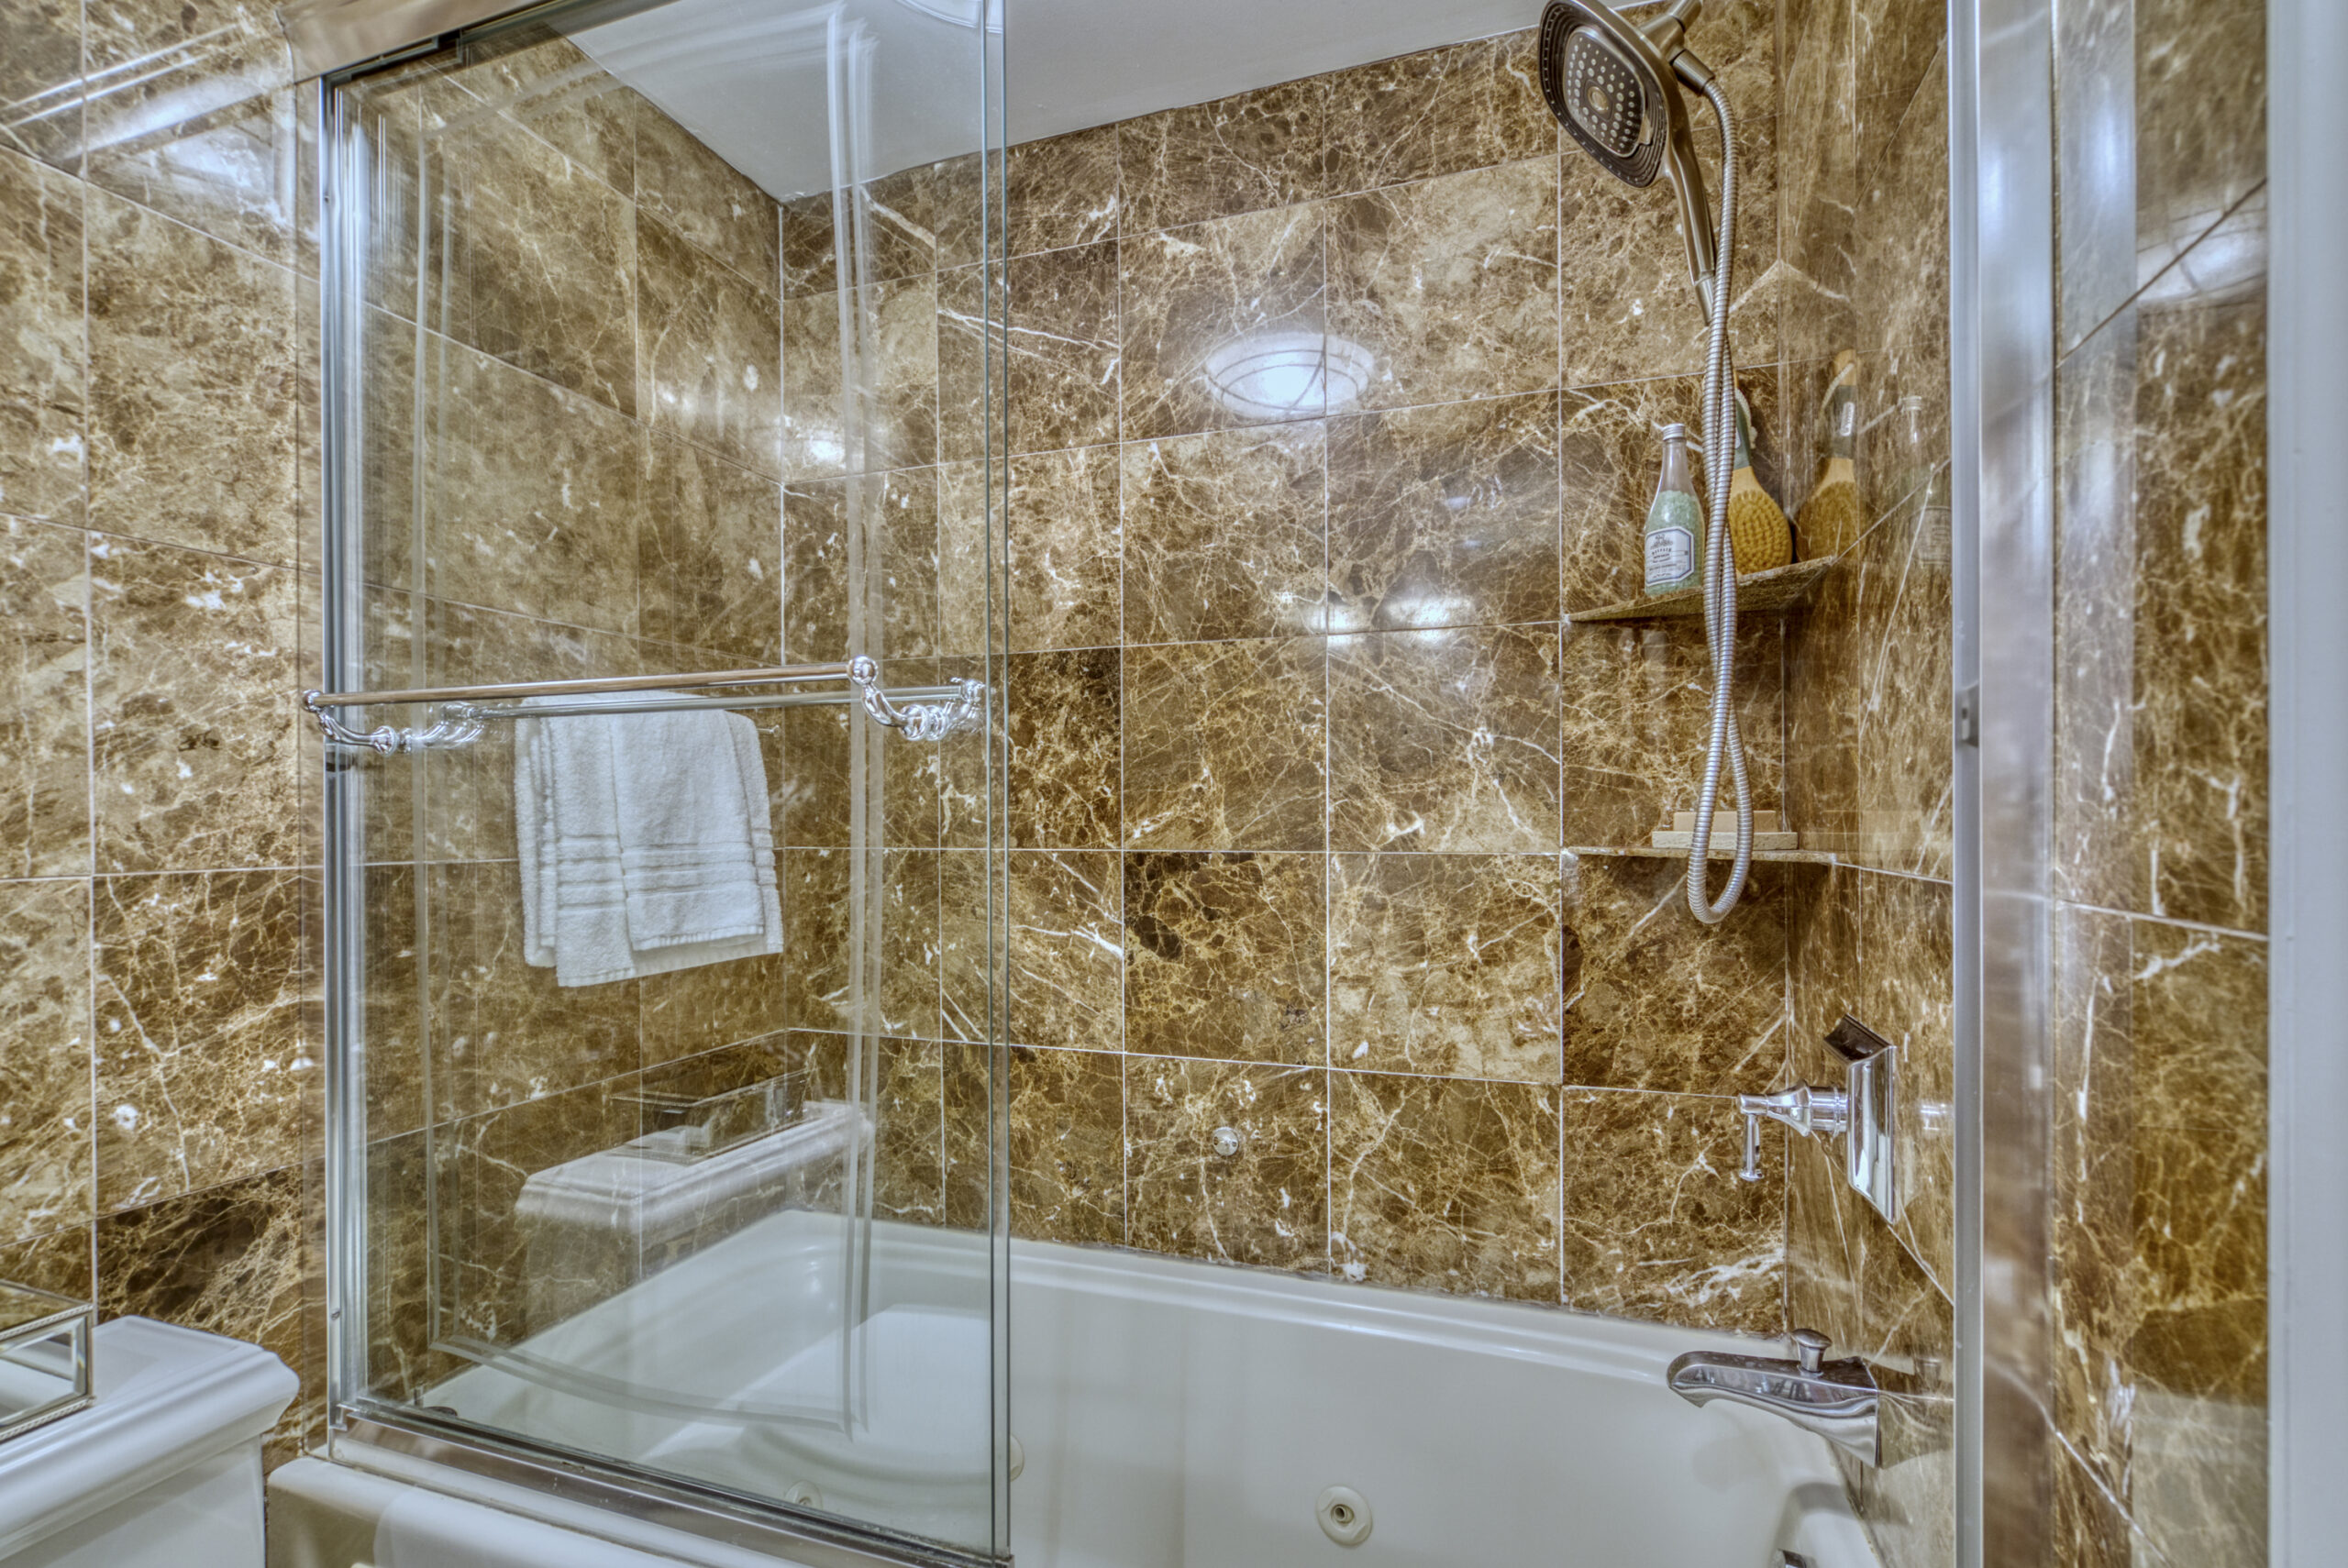 Professional interior photo of 1215 N Nash St #1, Arlington - showing the primary full bathroom shower/tub with brown marble effect tile on surrounding walls and glass sliding doors